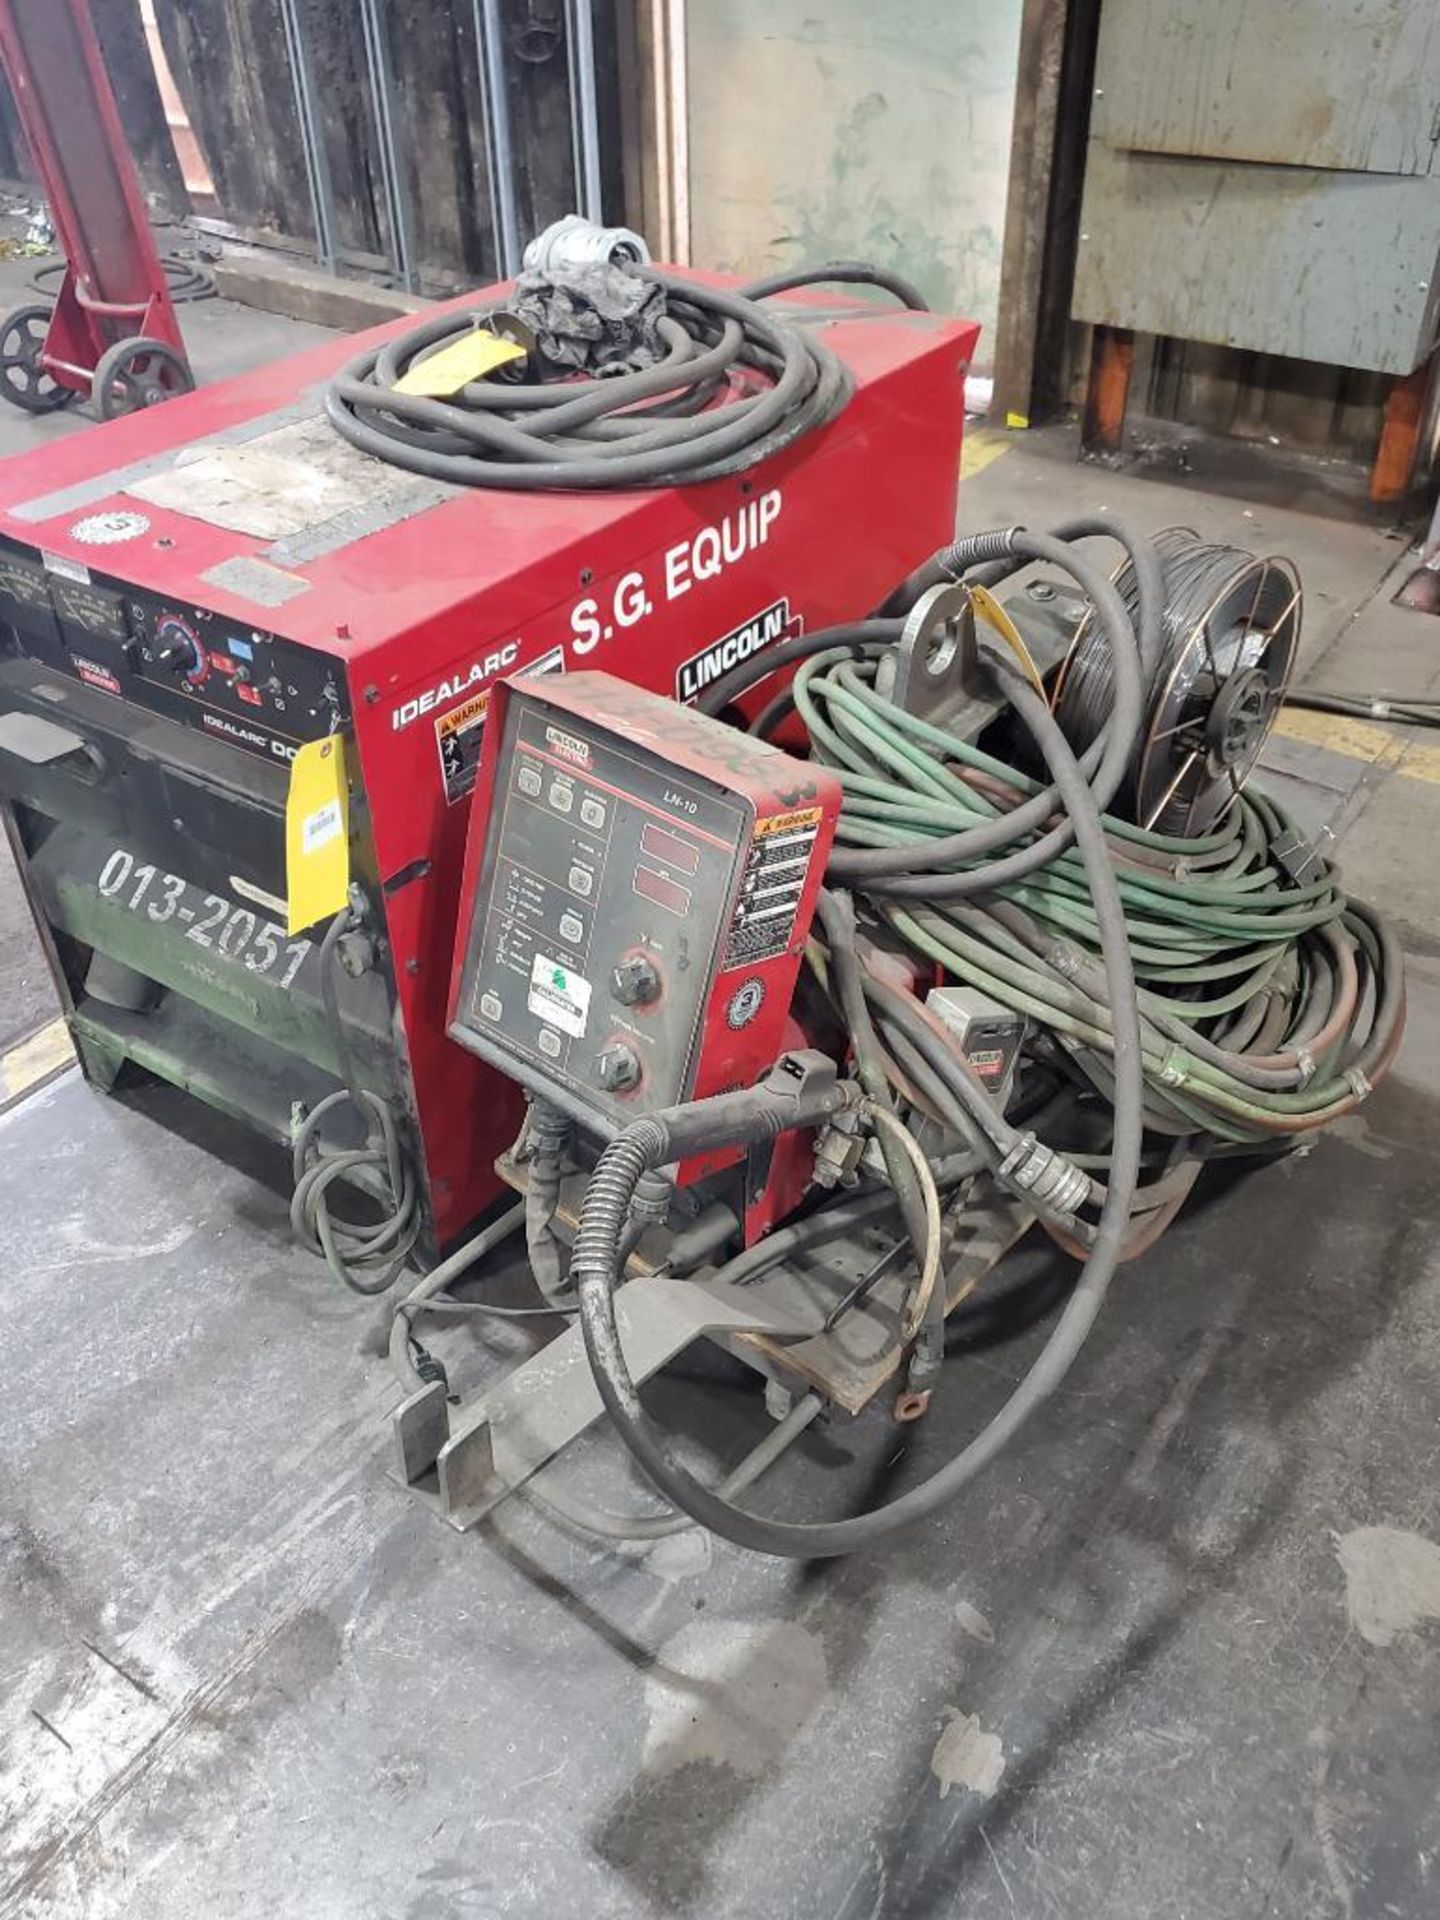 LINCOLN ELECTRIC IDEALARC DC-600 WELDER 230-460V WITH LN-10 WIRE FEED SN.U1121002540 115V - Image 2 of 7